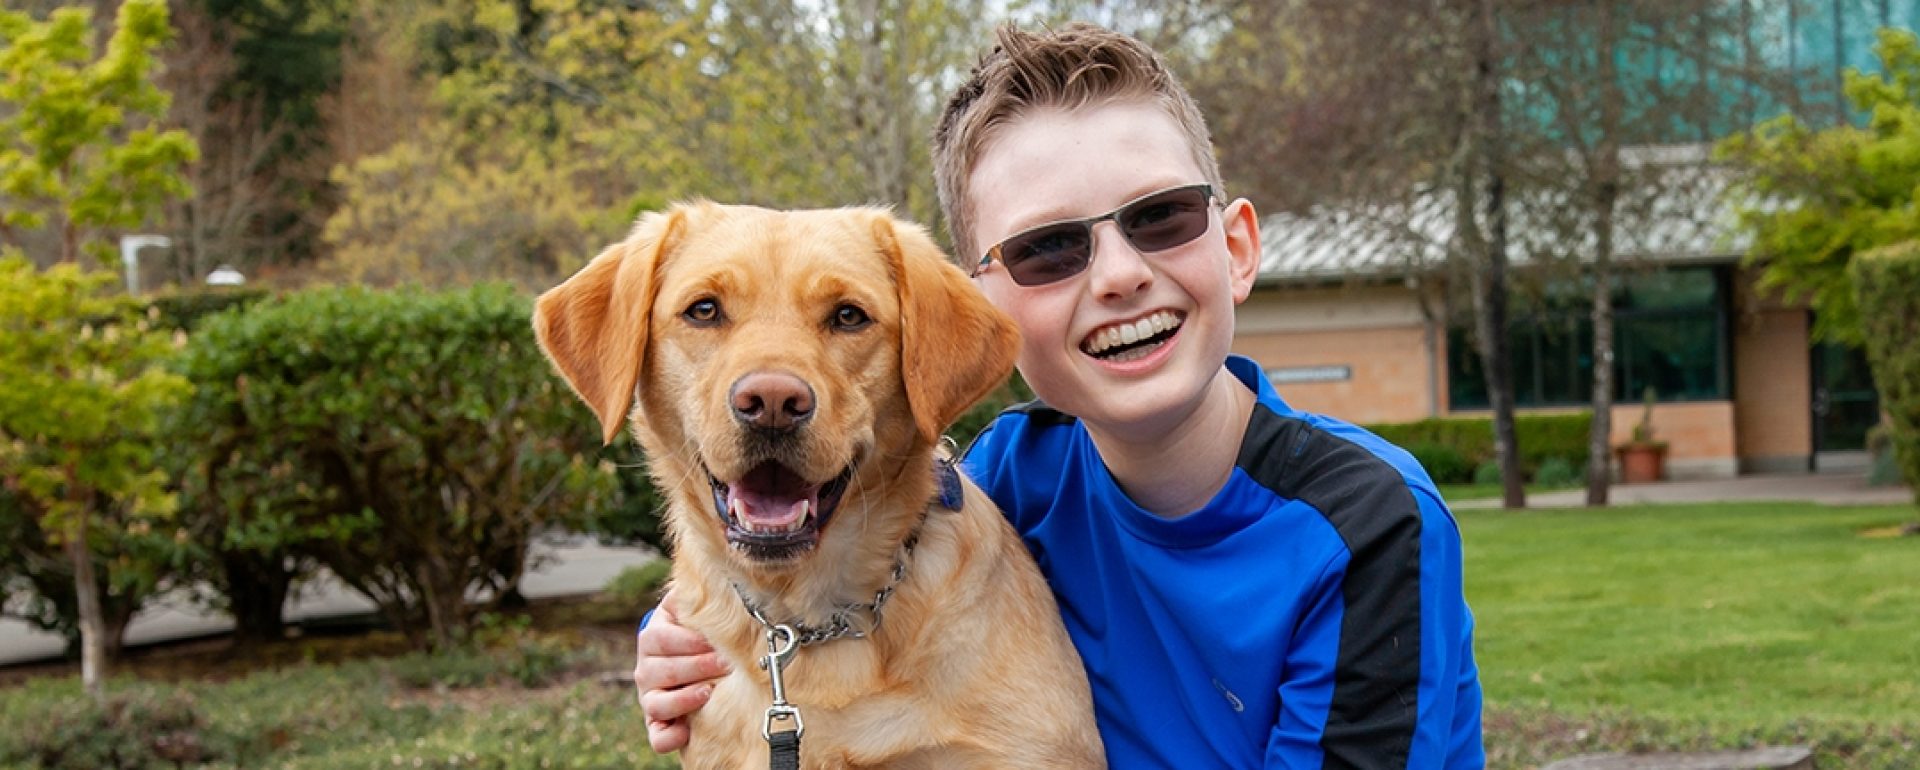 A young boy hugging a yellow Lab K9 Buddy dog; both have ear-to-ear grins.